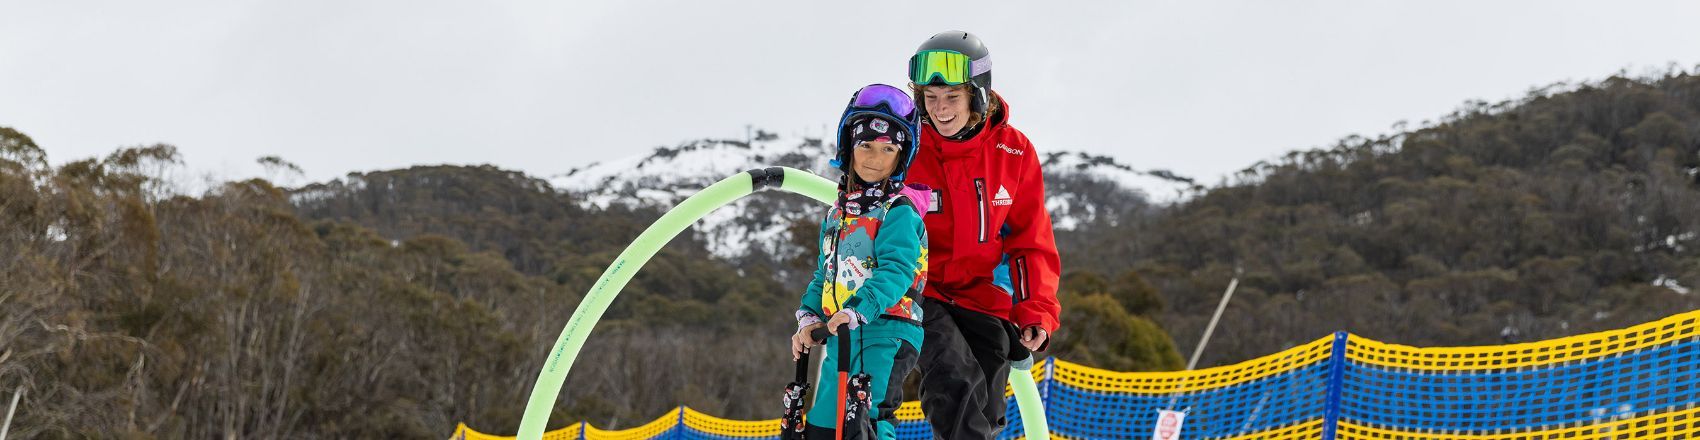 Picture of Burton Riglets Snowboard Program – 5 to 6 Years